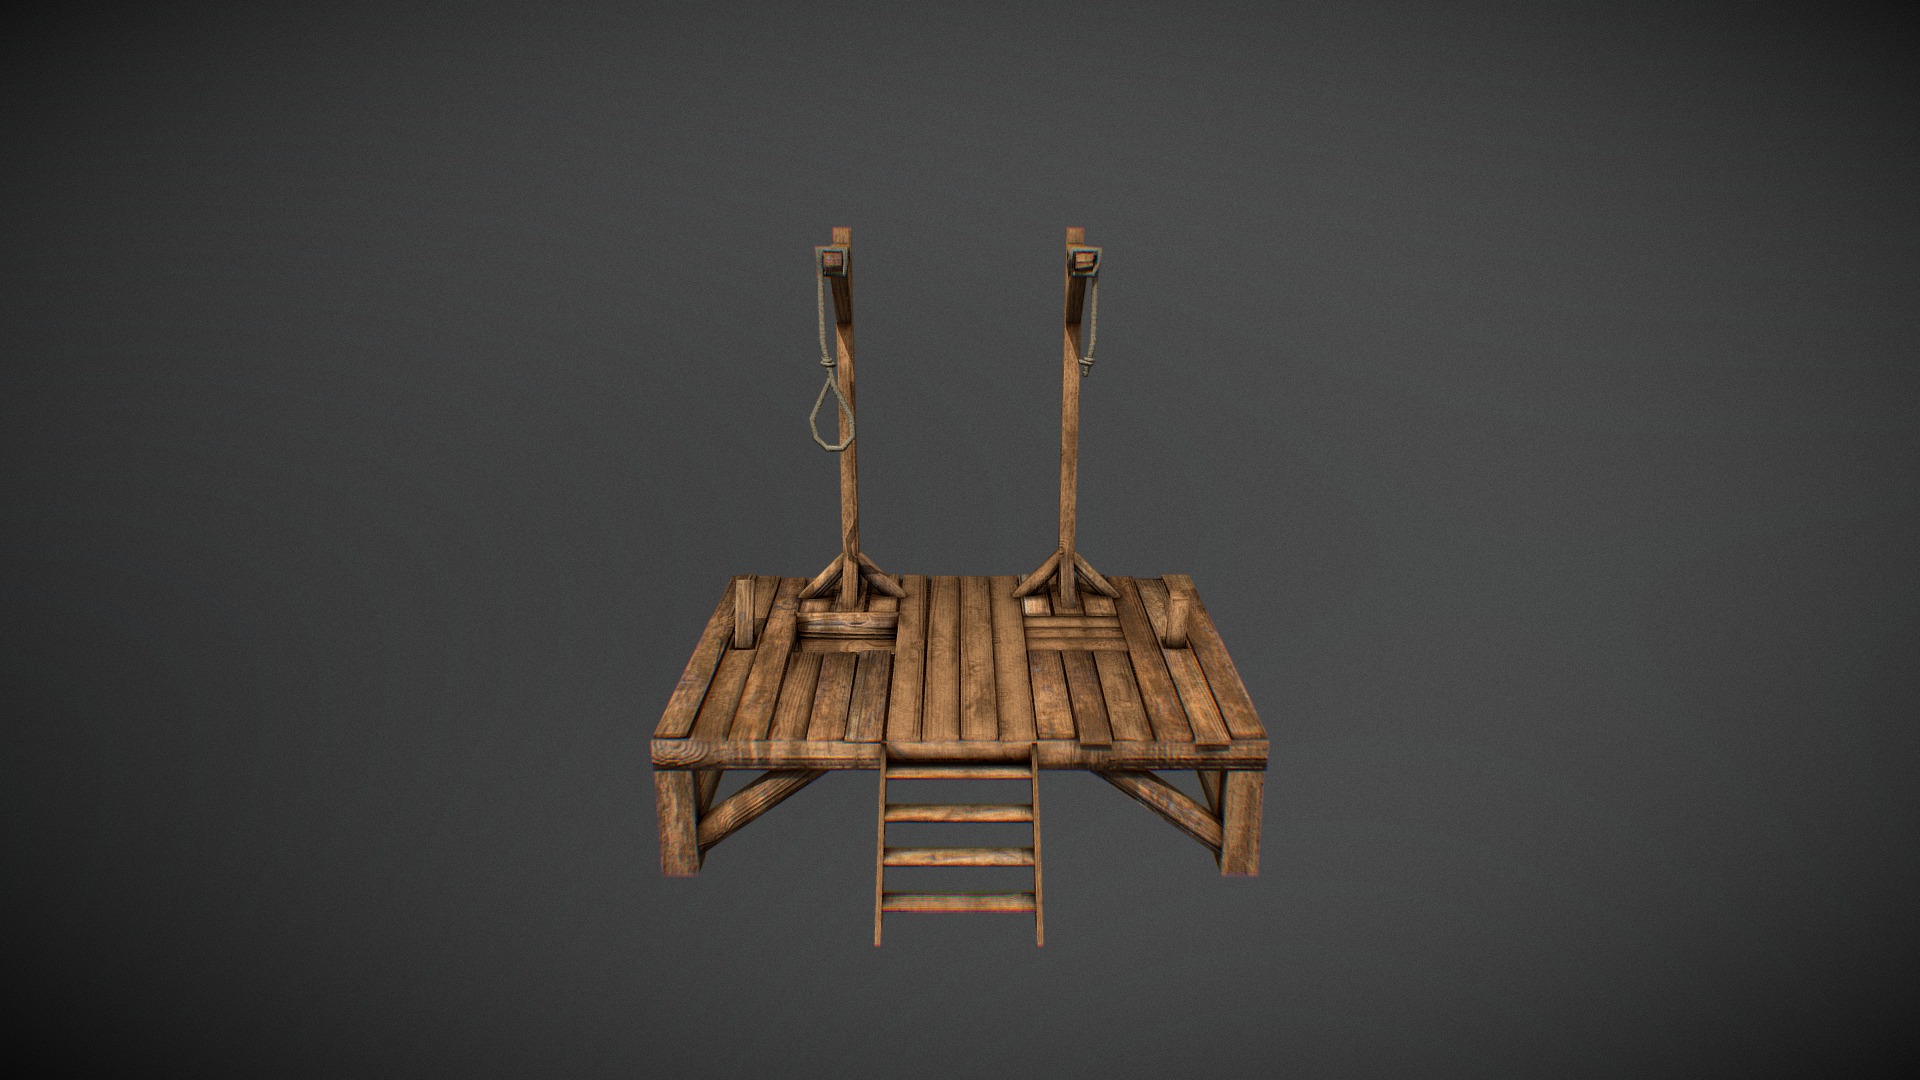 3D model Torture V2 - This is a 3D model of the Torture V2. The 3D model is about a wooden structure with a metal frame.